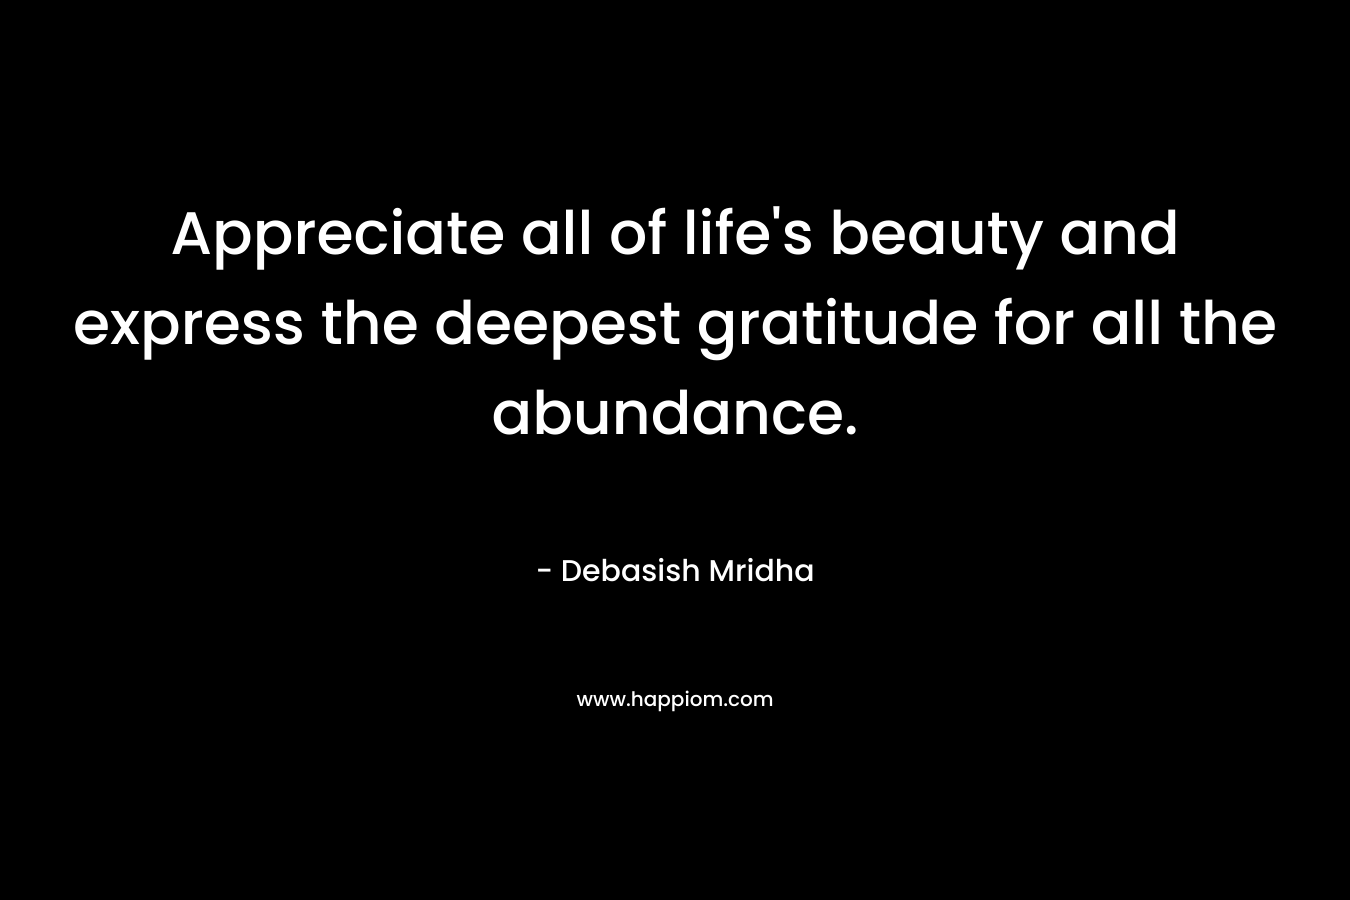 Appreciate all of life's beauty and express the deepest gratitude for all the abundance.